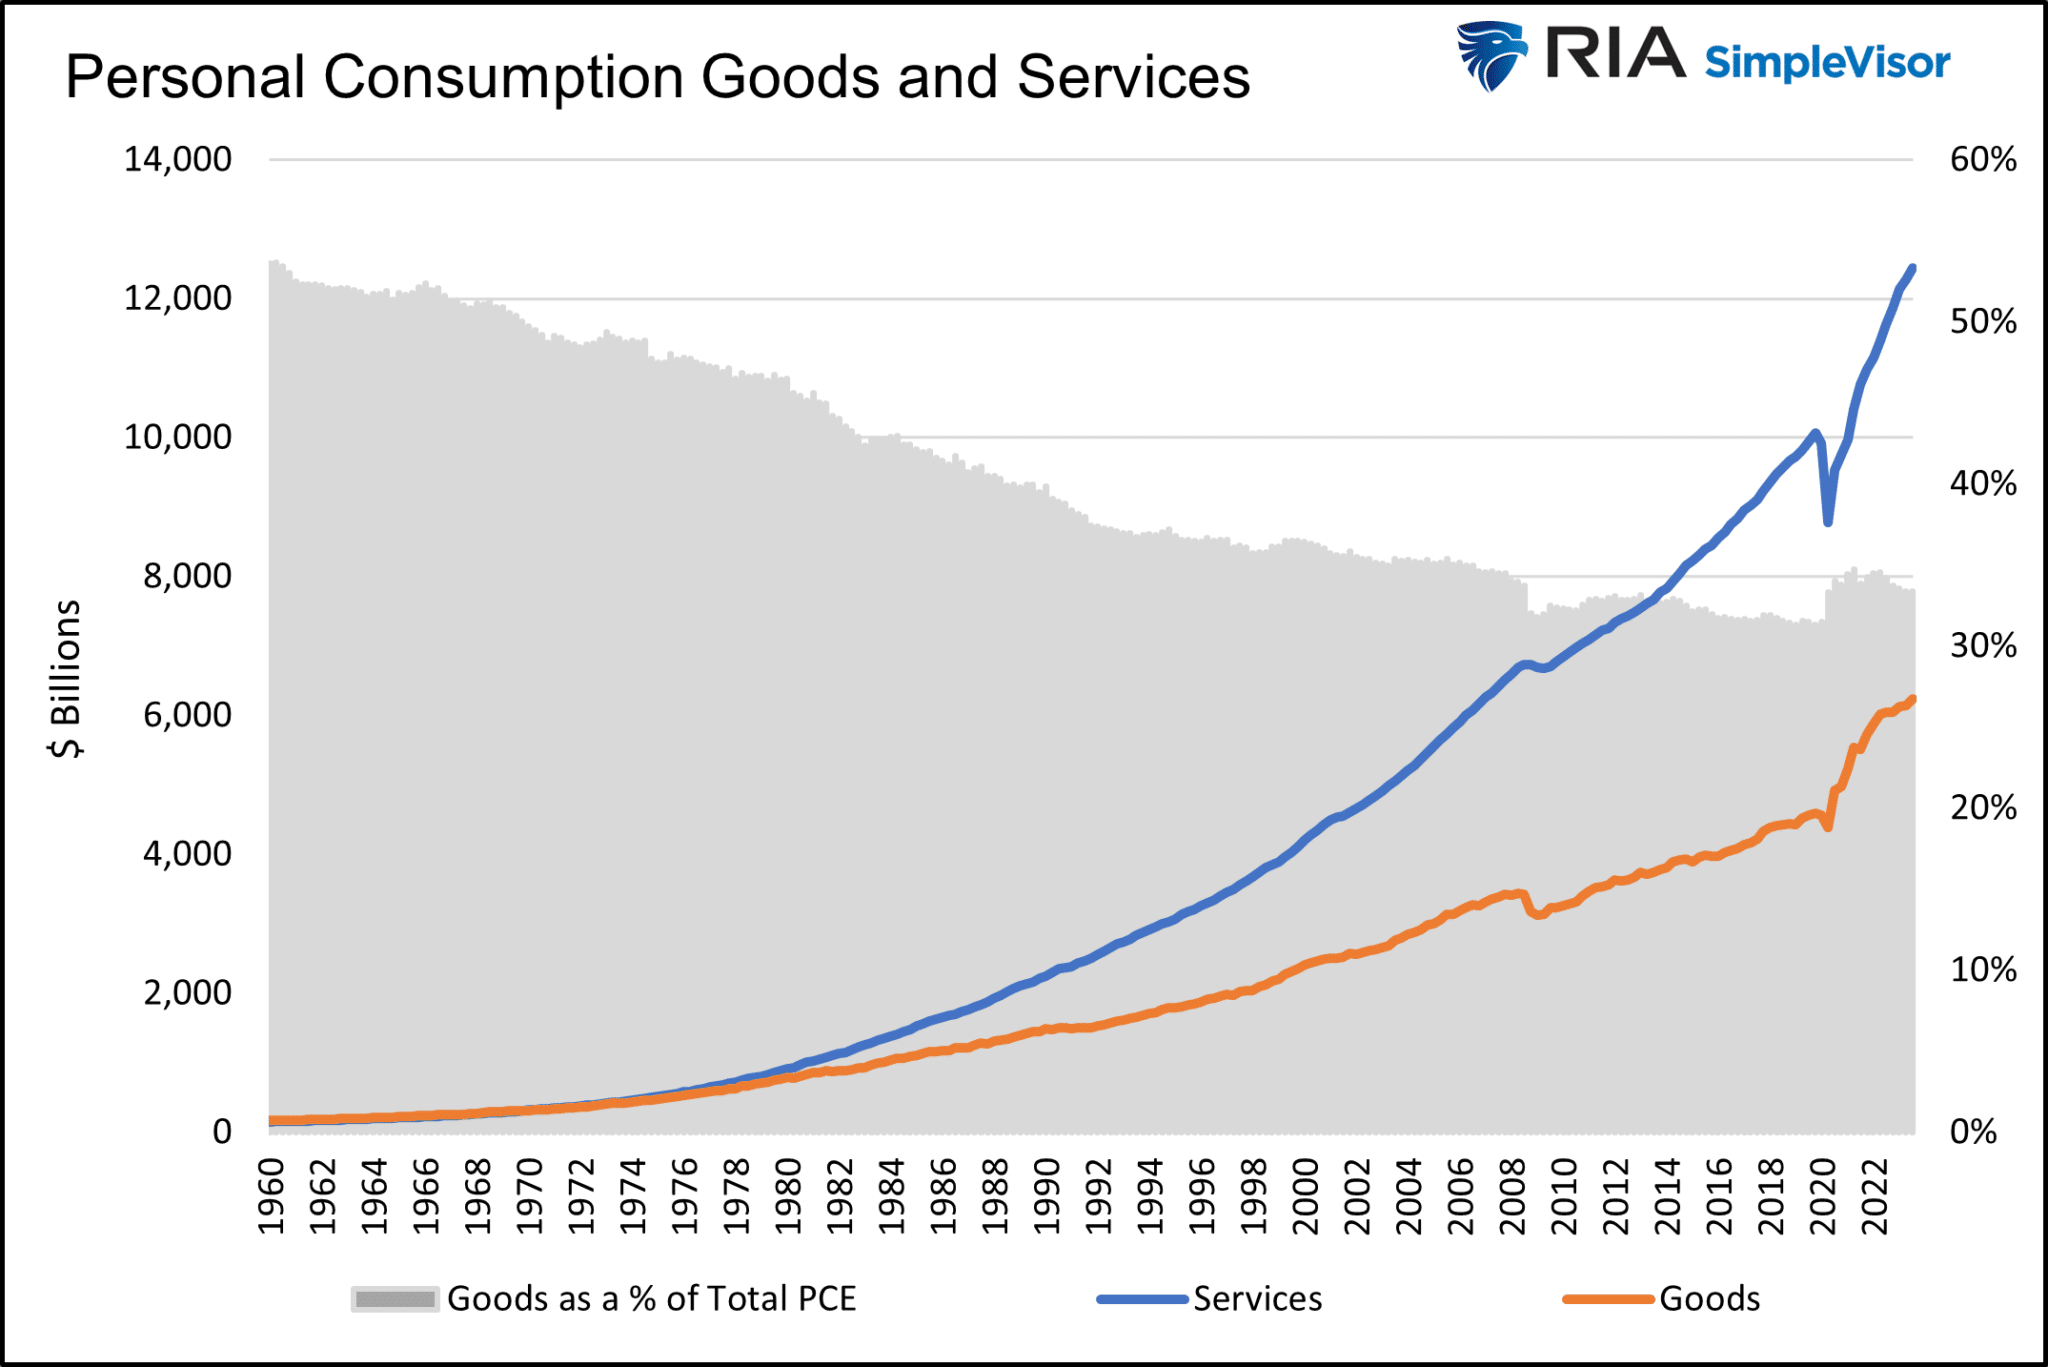 Personal Consumption Goods and Services